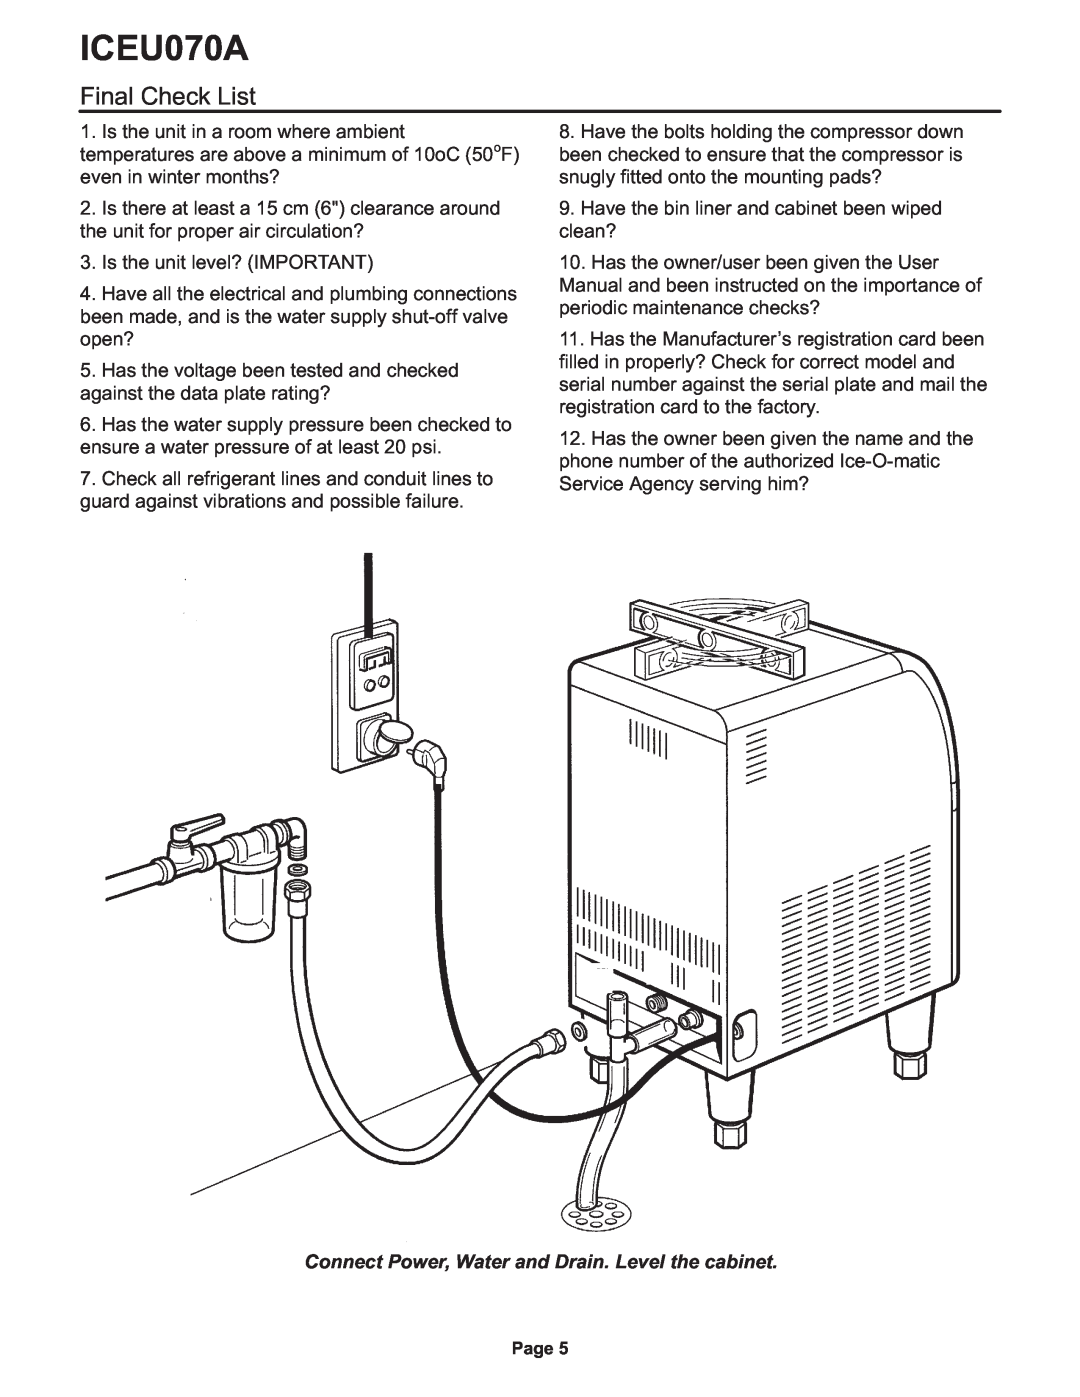 Ice-O-Matic ICEU070A installation manual Final Check List, Connect Power, Water and Drain. Level the cabinet 